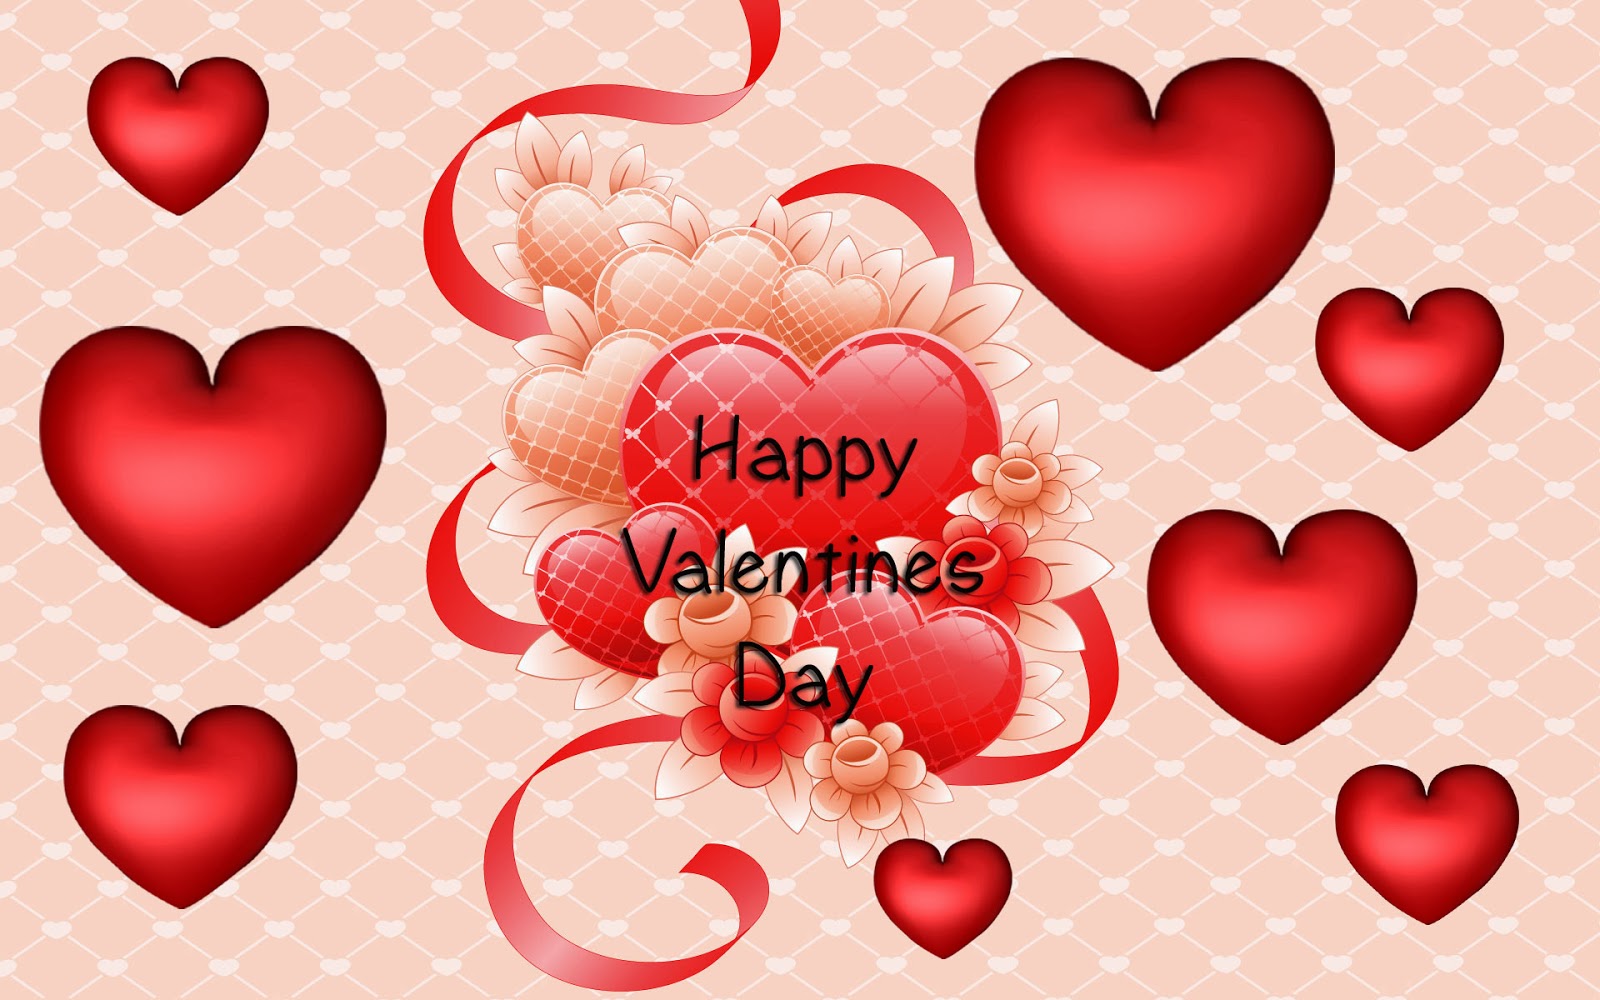 Happy valentines day images, photos, pictures HD wallpapers